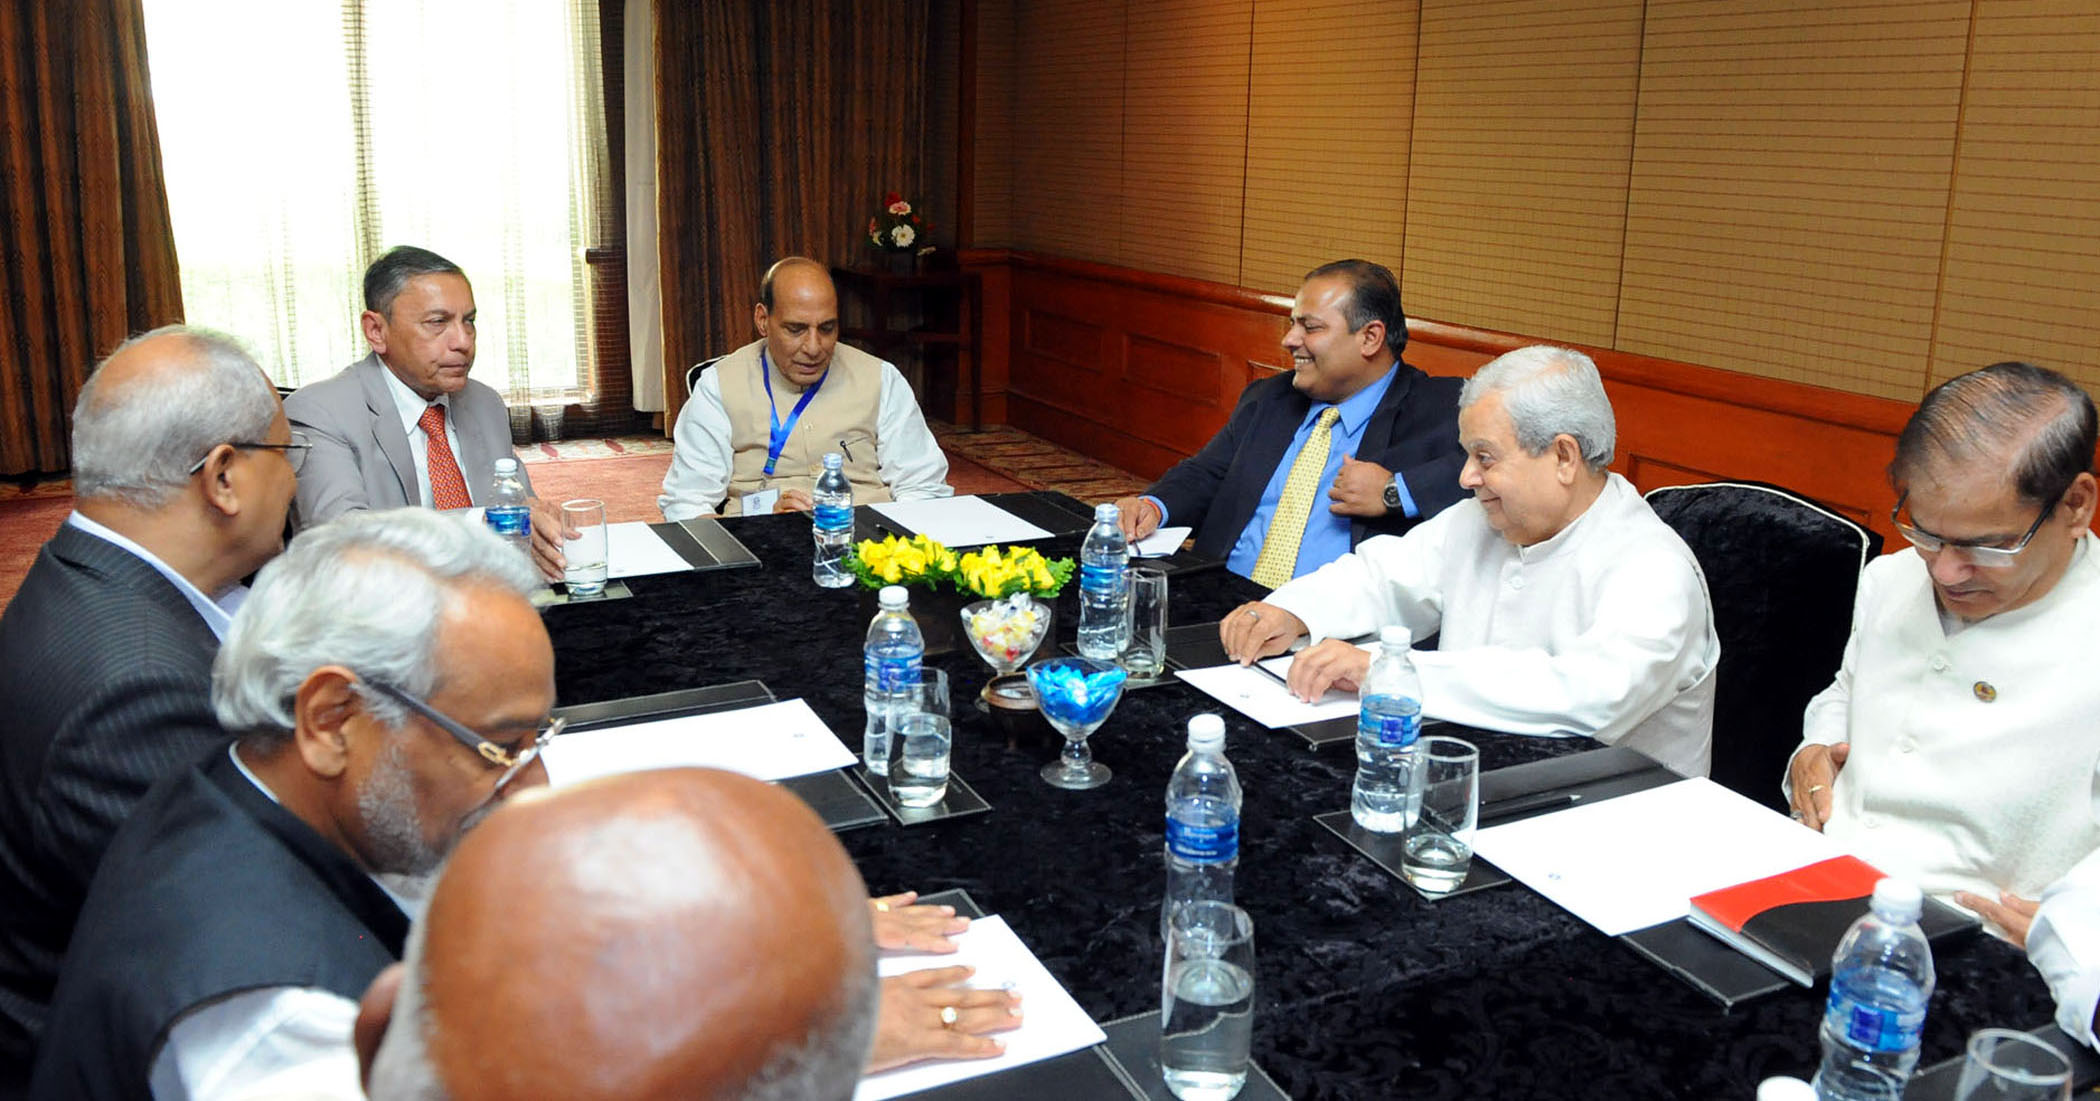 The Union Home Minister, Rajnath Singh meeting the various leaders of Madhesh based political parties, in Kathmandu on September 19, 2014.